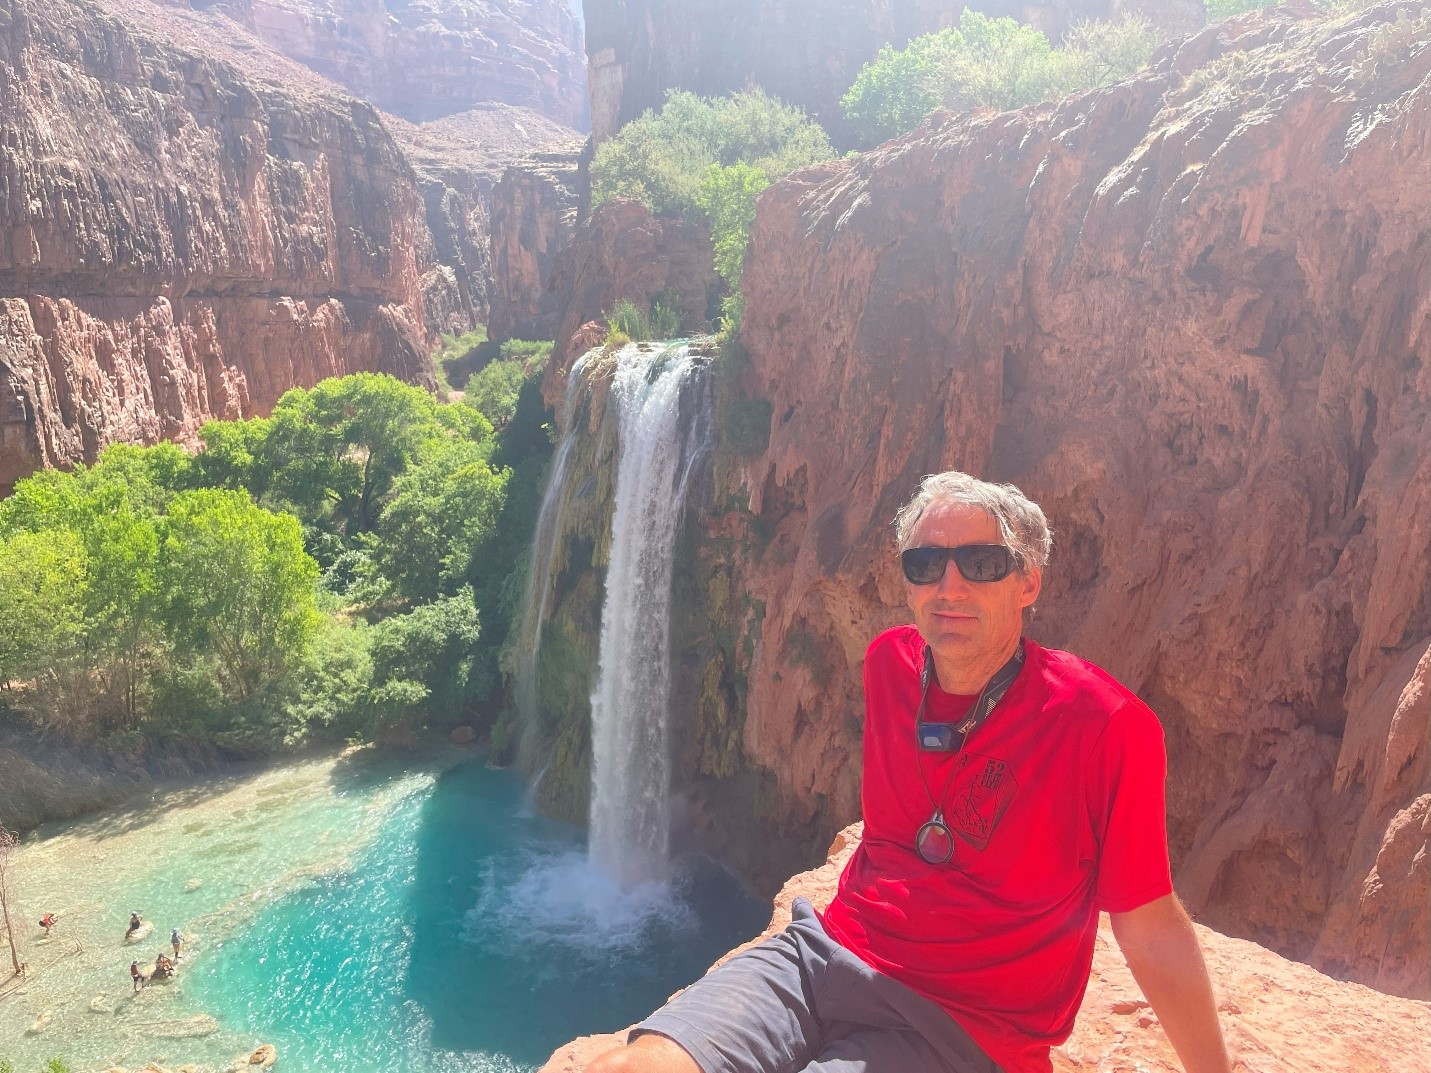 First viewing of the Havasupai waterfall